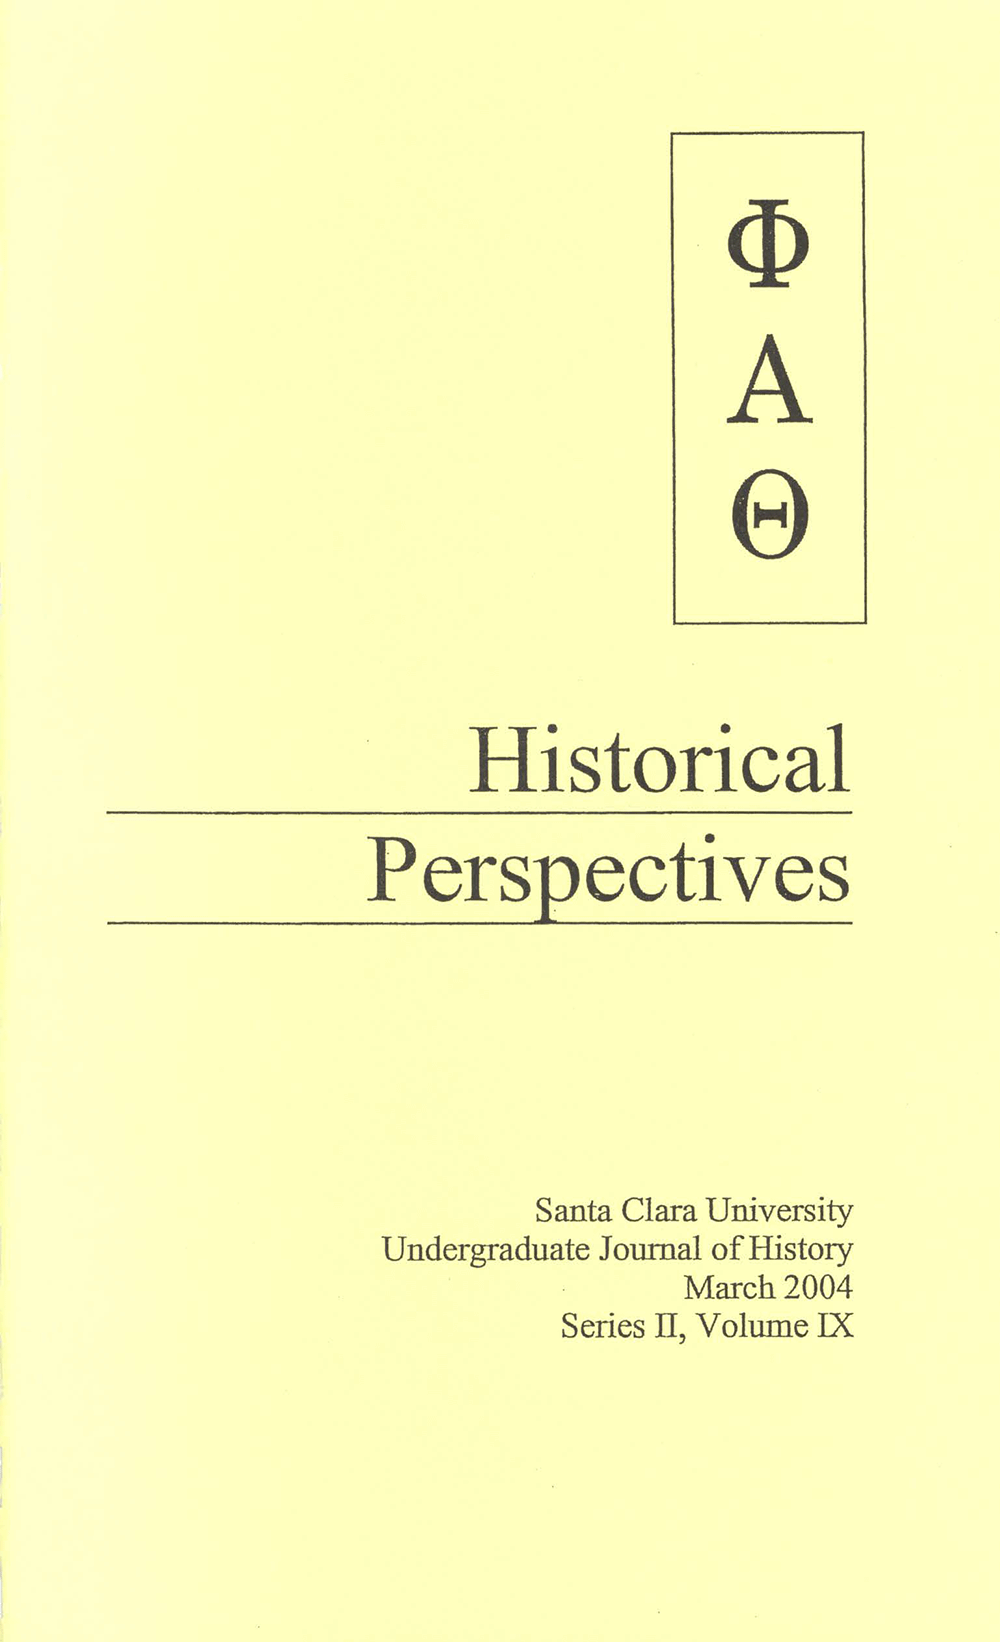 Historical Perspectives 2004, volume 9